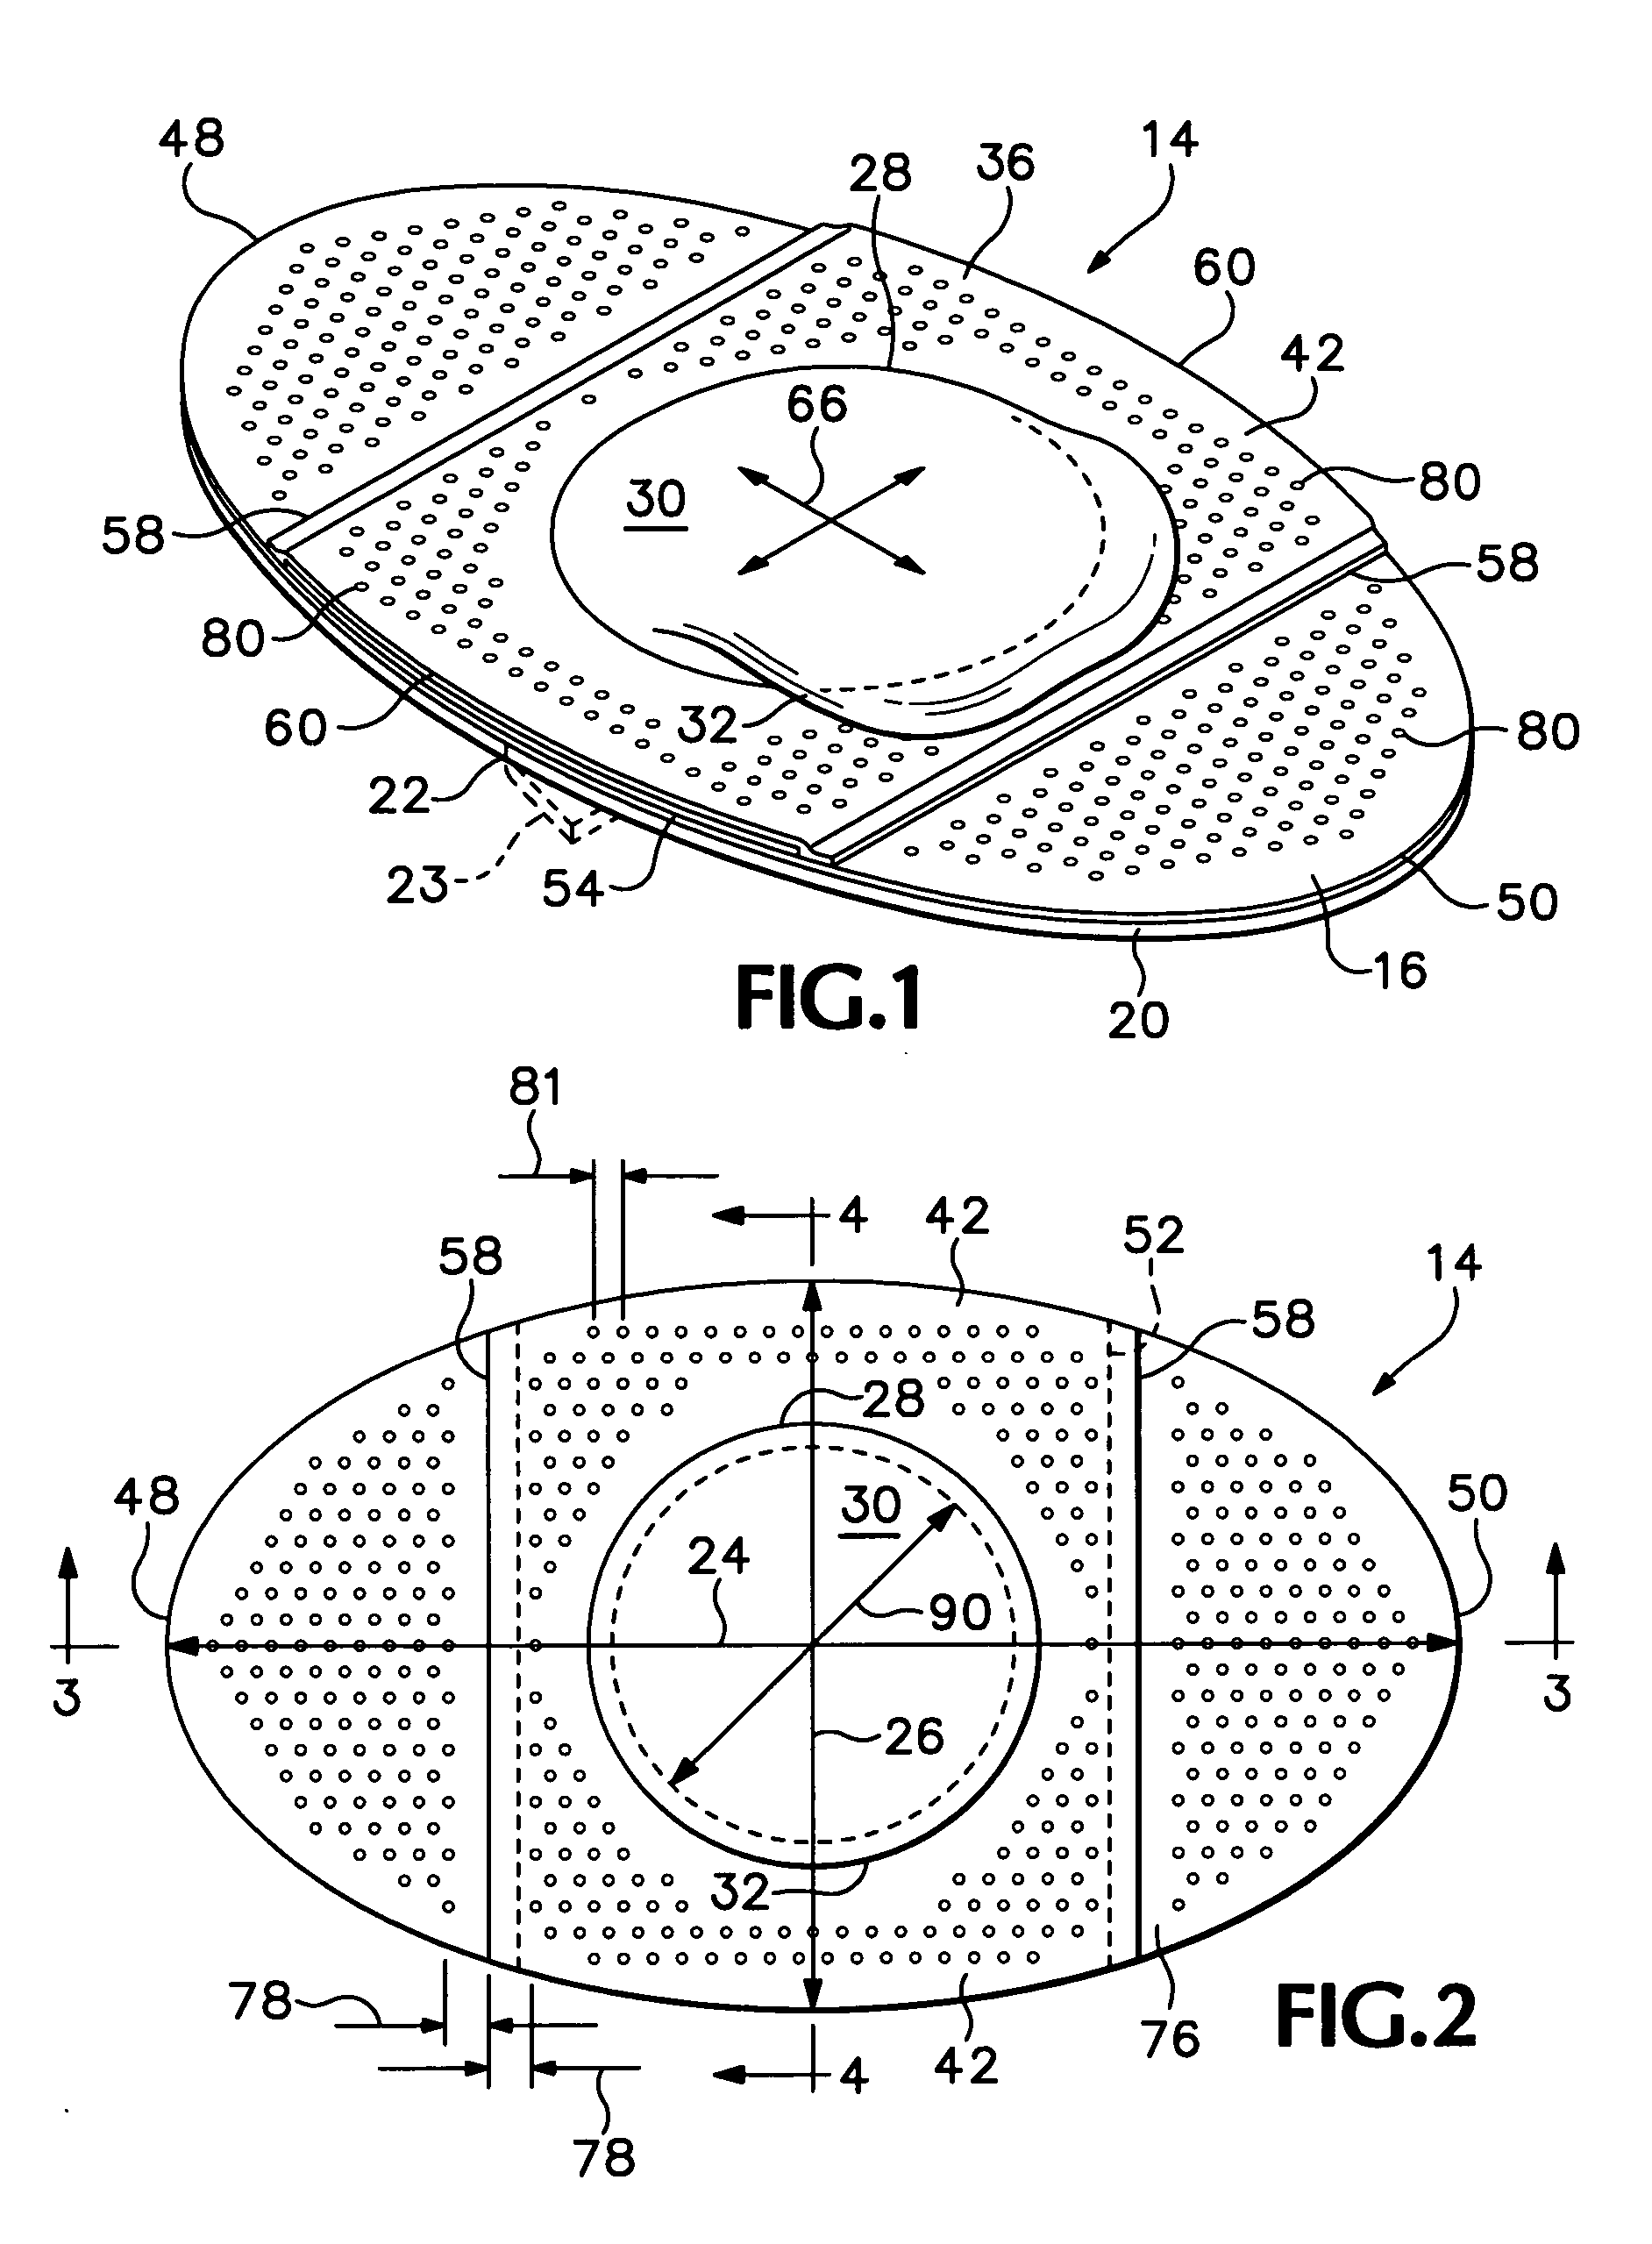 Friction reducing devices